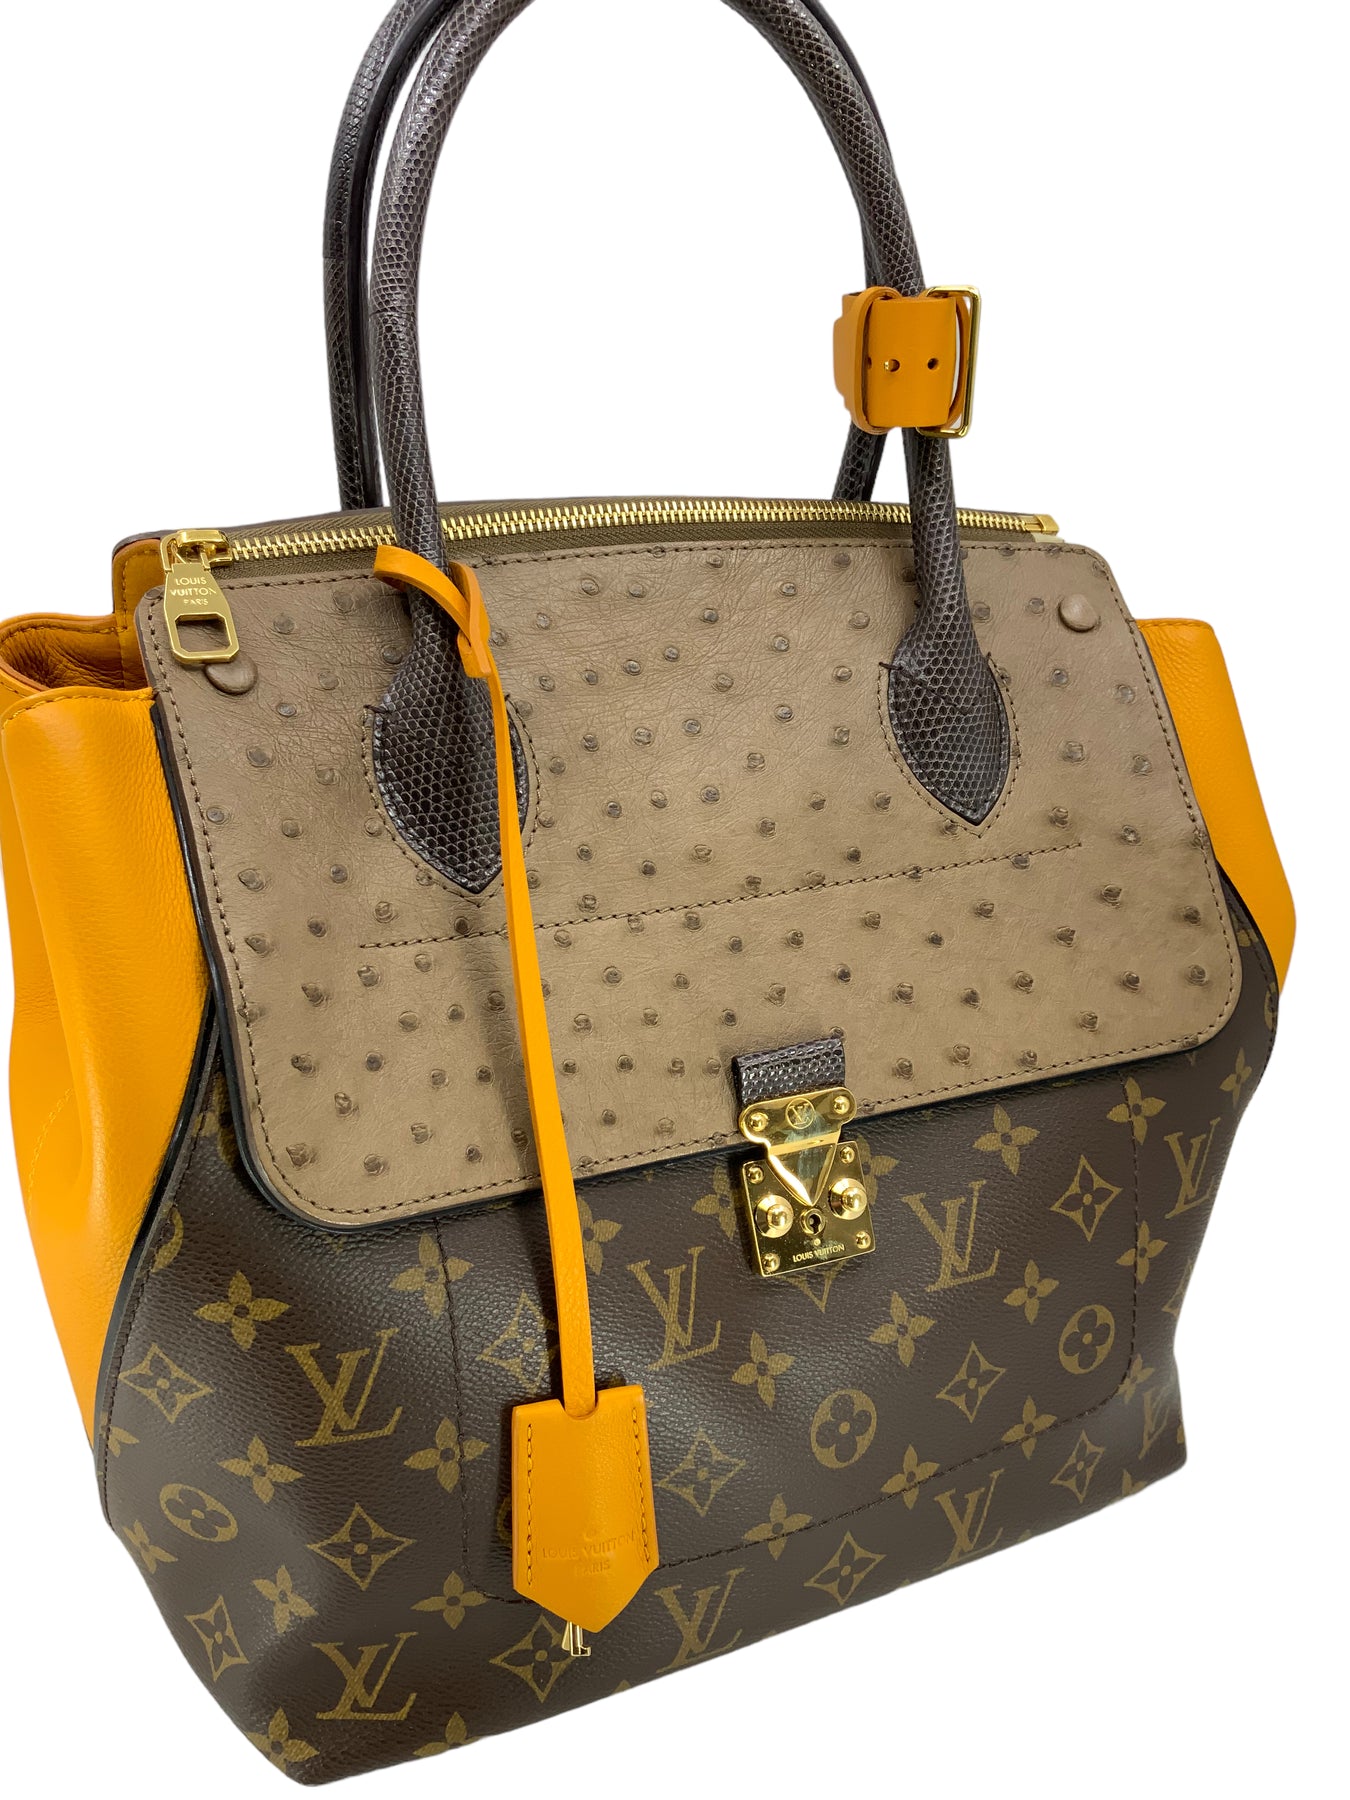 Vuitton Limited 